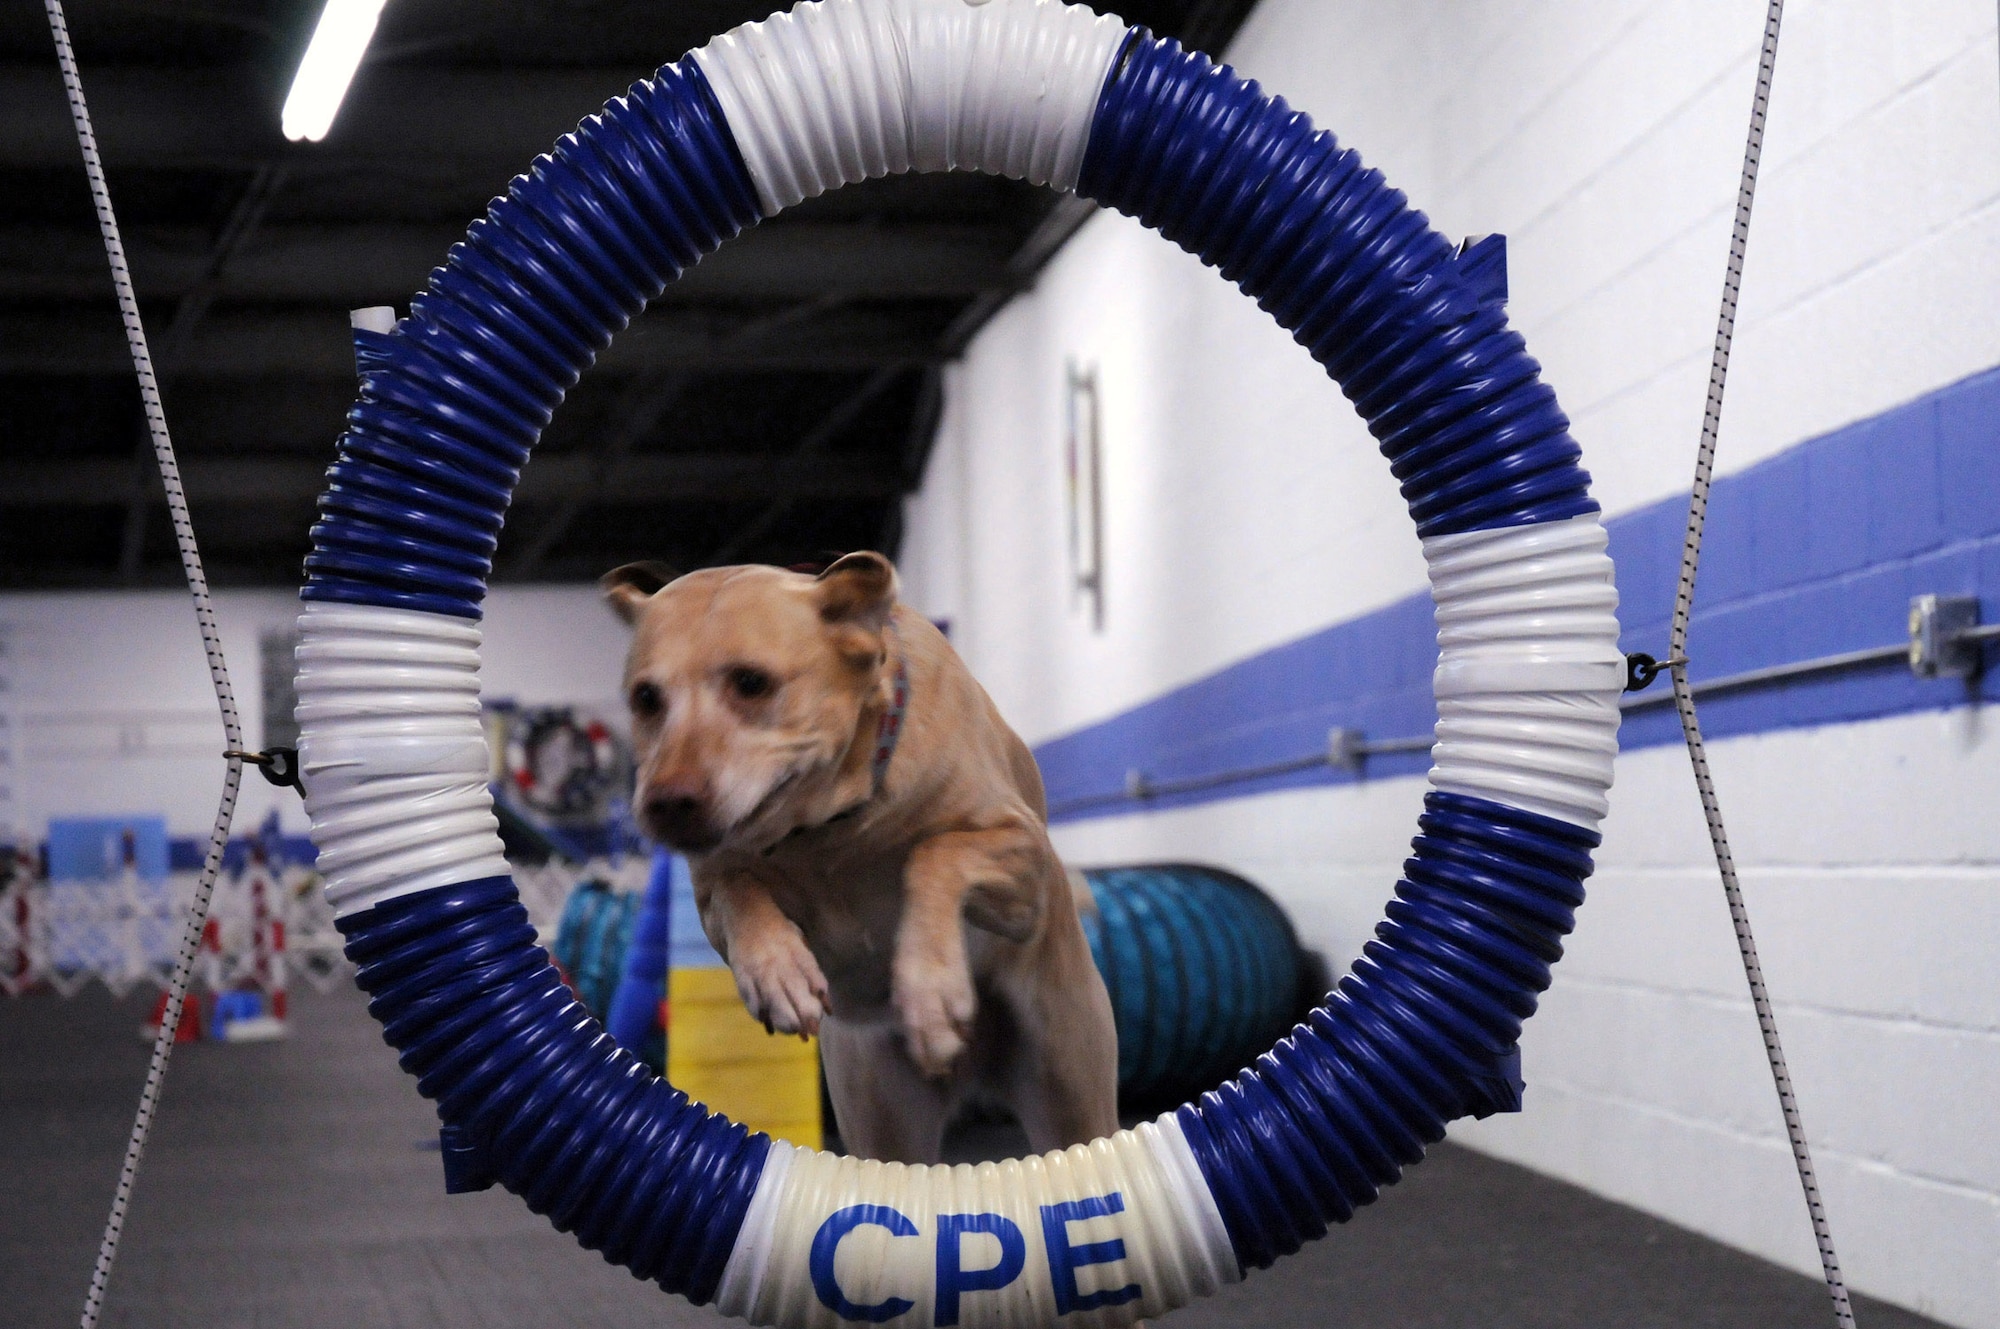 Zoey, a 9-year-old Labrador retriever belonging to 1st Lt. Heather Greatting, completes an obstacle Feb. 11 during agillity.  The lieutenant obtained Zoey from a Labrador rescue center and currently competes with her in canine agility. Lieutenant Greatting is a space intelligence surveillance and reconnaissance systems employment analyst with the National Air and Space Intelligence Center at Wright-Patterson Air Force Base, Ohio. (U.S. Air Force photo/Staff Sgt. Joshua Strang) 